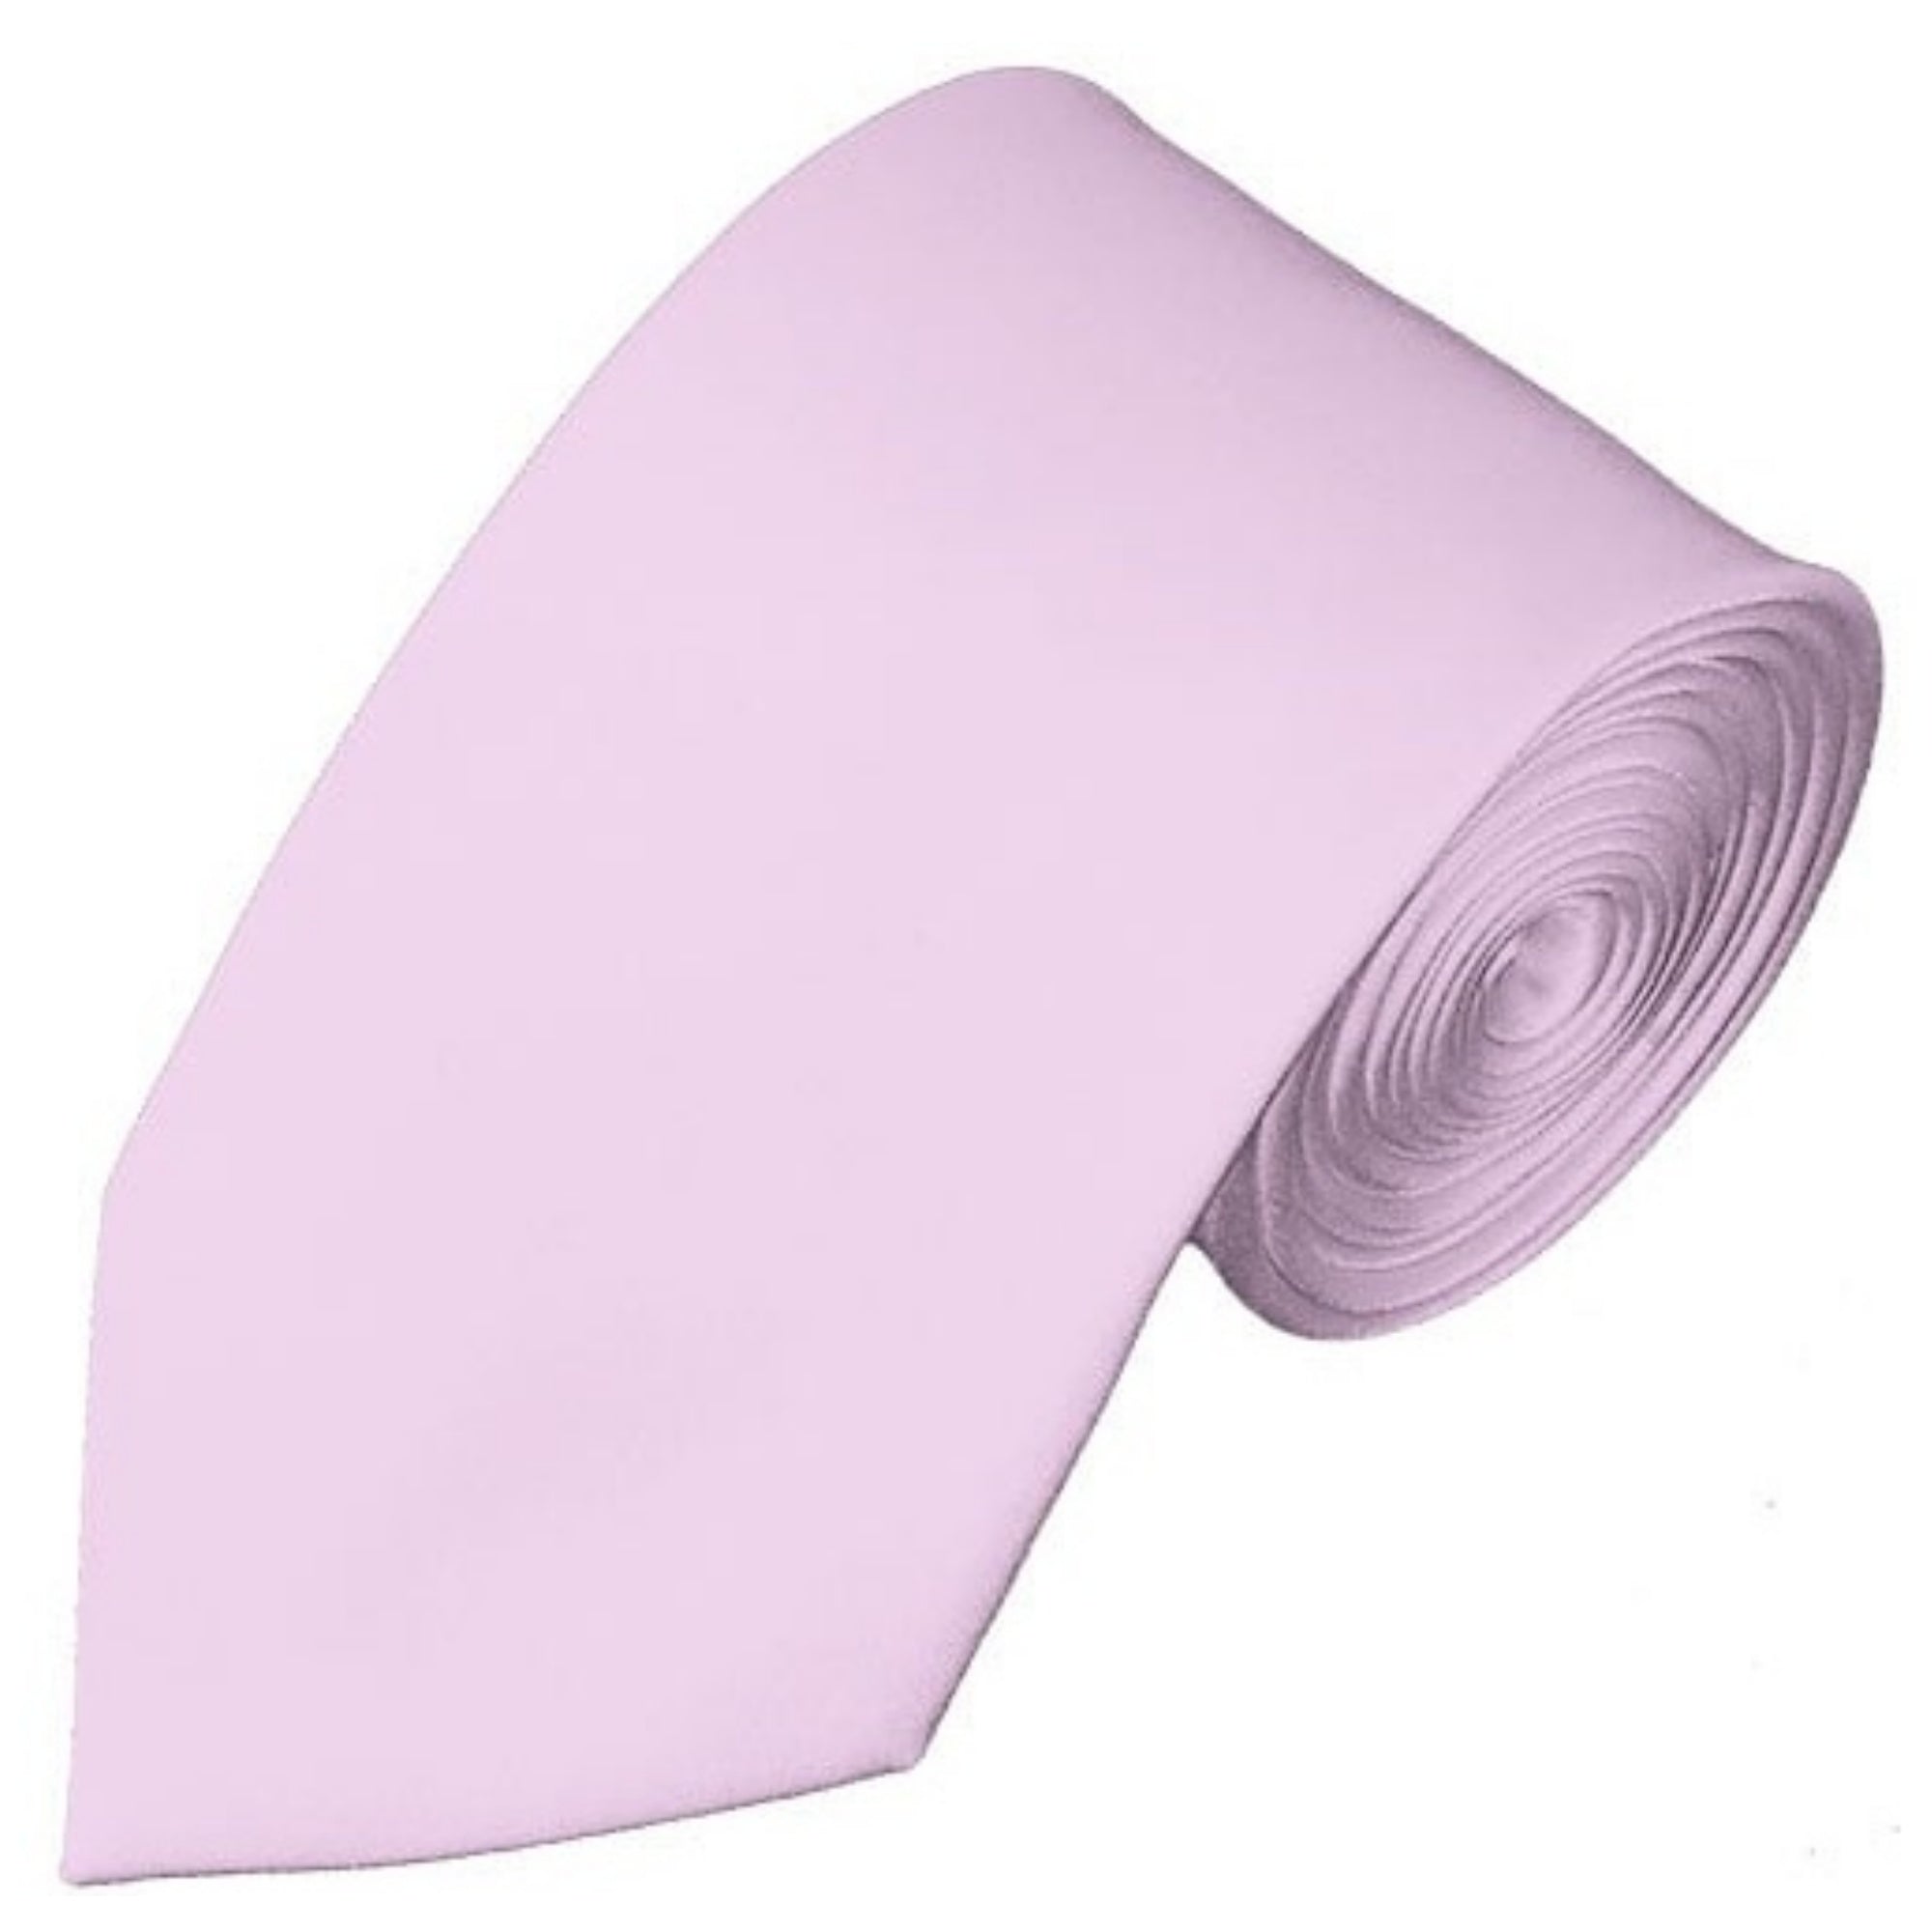 TheDapperTie Men's Solid Color Slim 2.75 Inch Wide And 58 Inch Long Neckties Neck Tie TheDapperTie Light Pink  